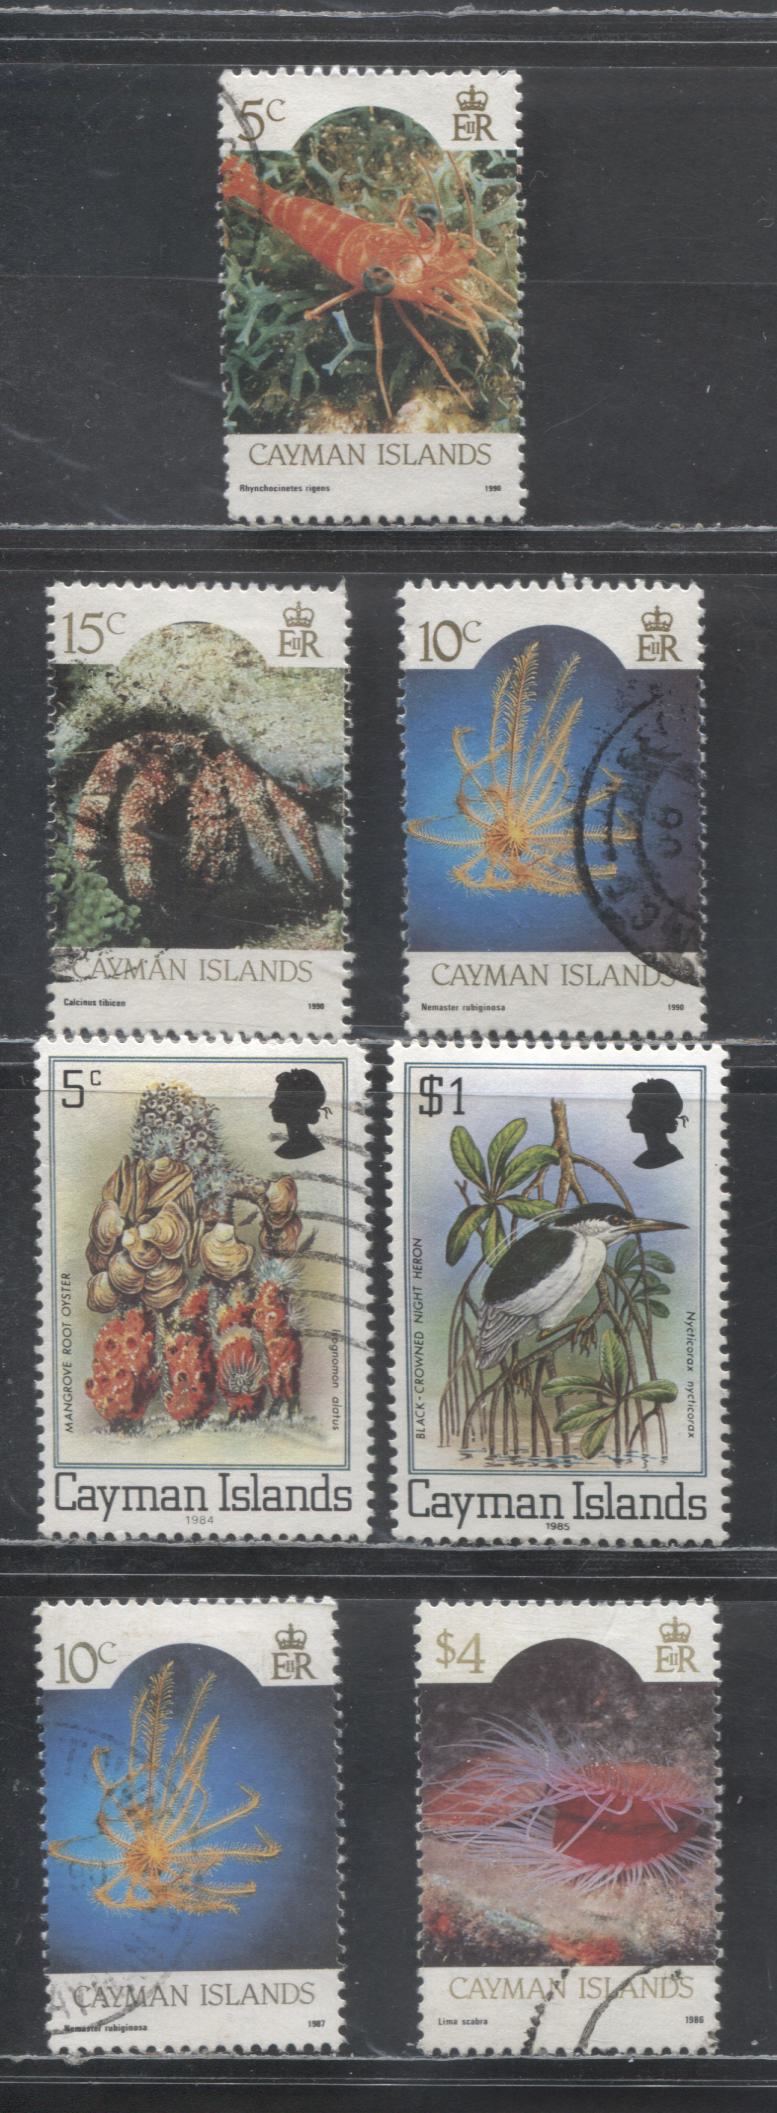 Lot 150 Cayman Islands SC#453c/573 1982-1986 Marine Life Issues, Inscribed 1982, 1984, 1986, 1987 & 1990, 7 Fine/Very Fine Used Singles, Estimated Value $25